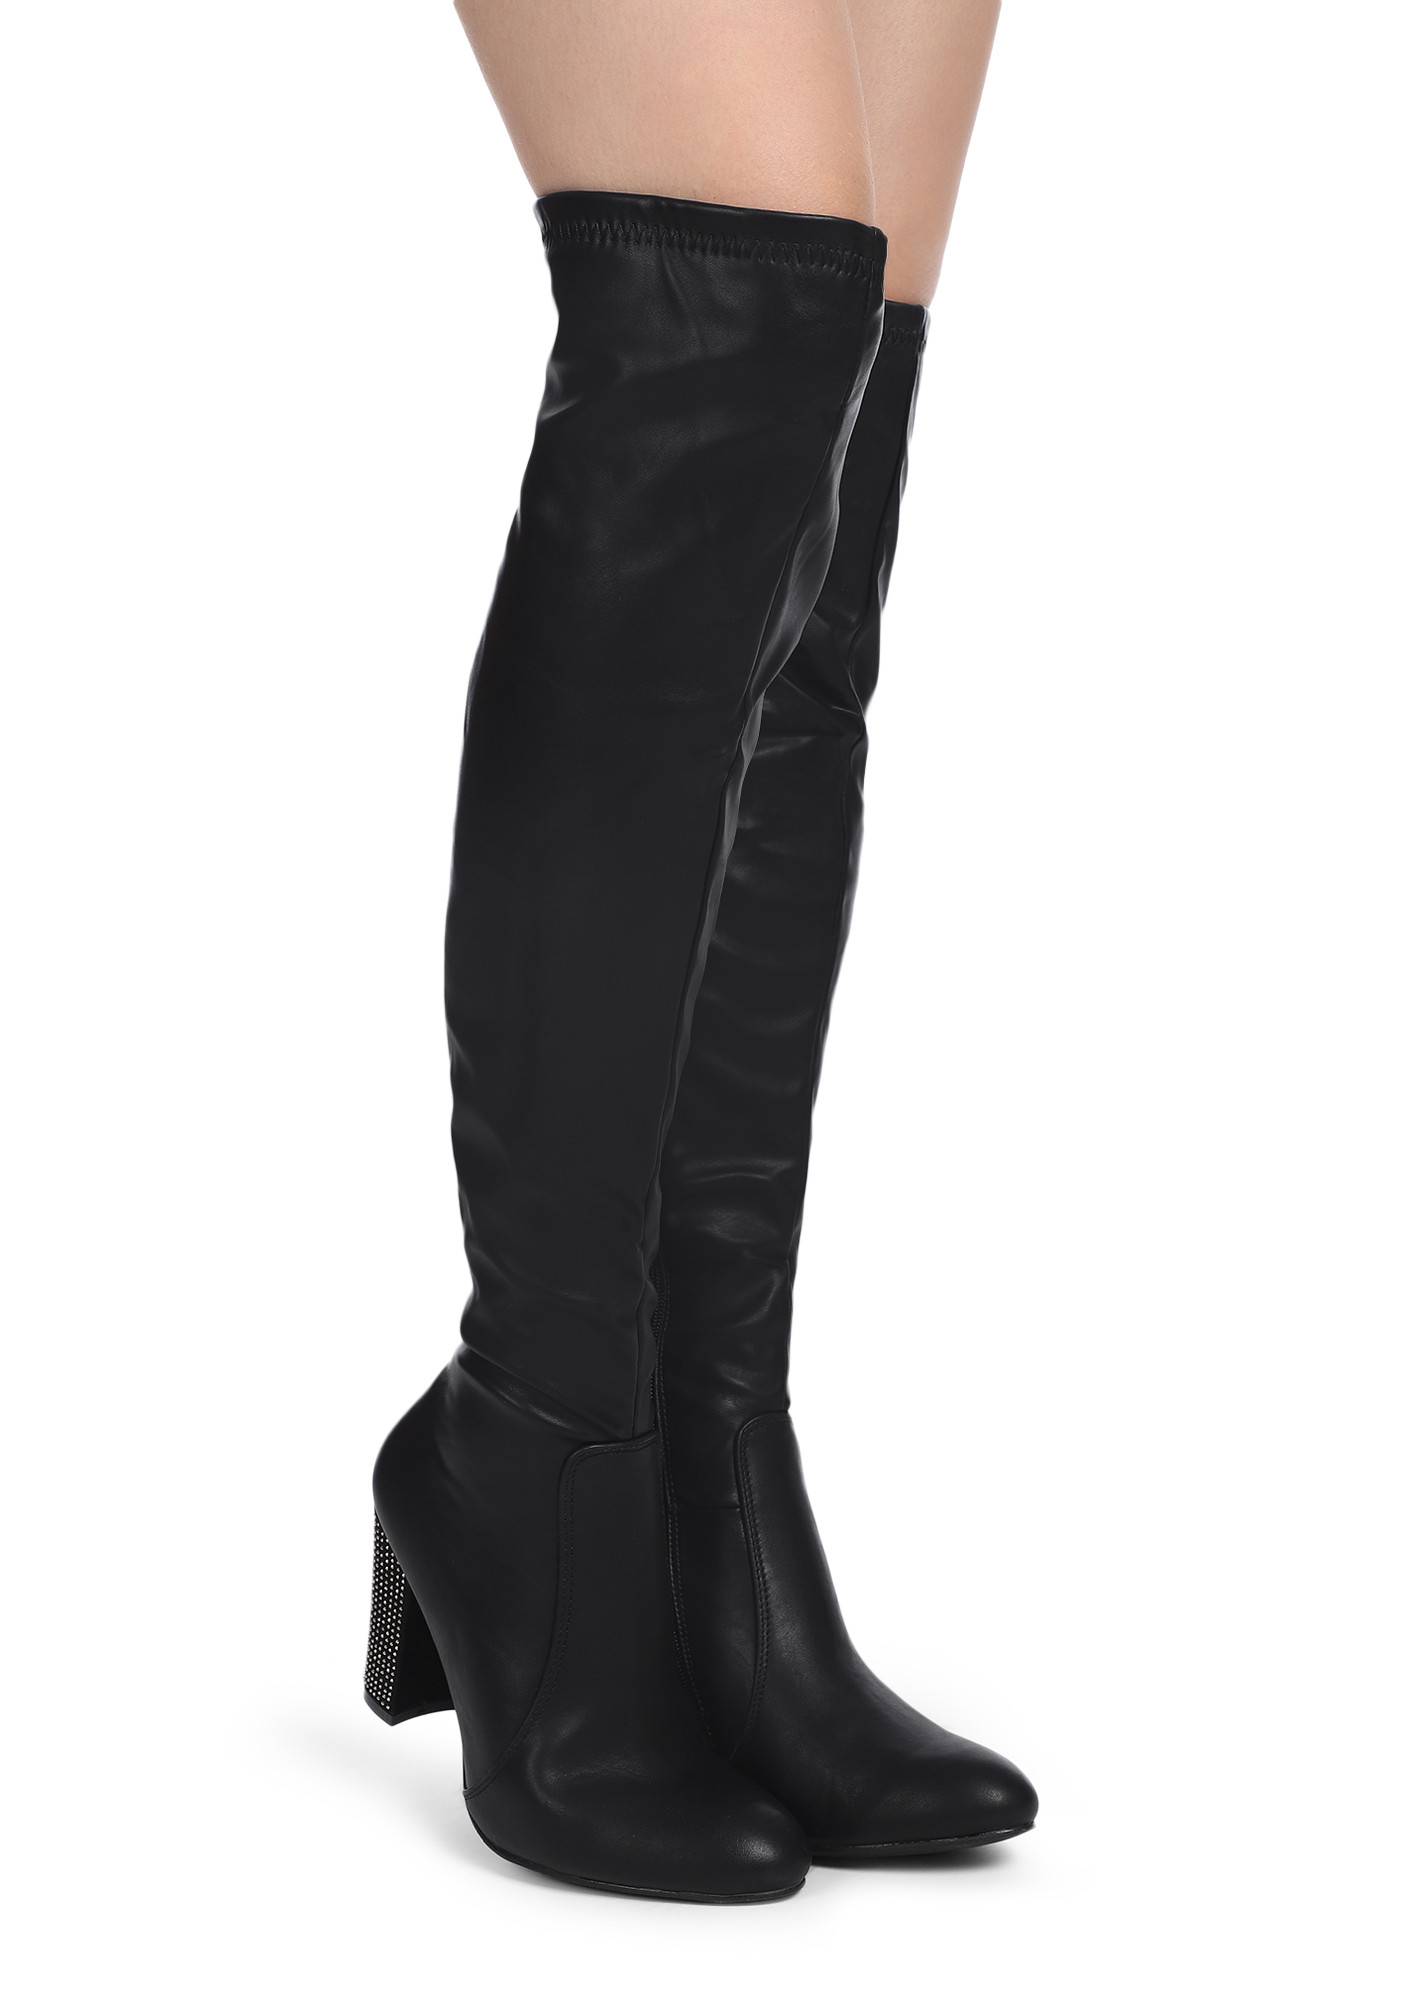 TURNING HEADS THROUGHOUT BLACK KNEE-HIGH BOOTS